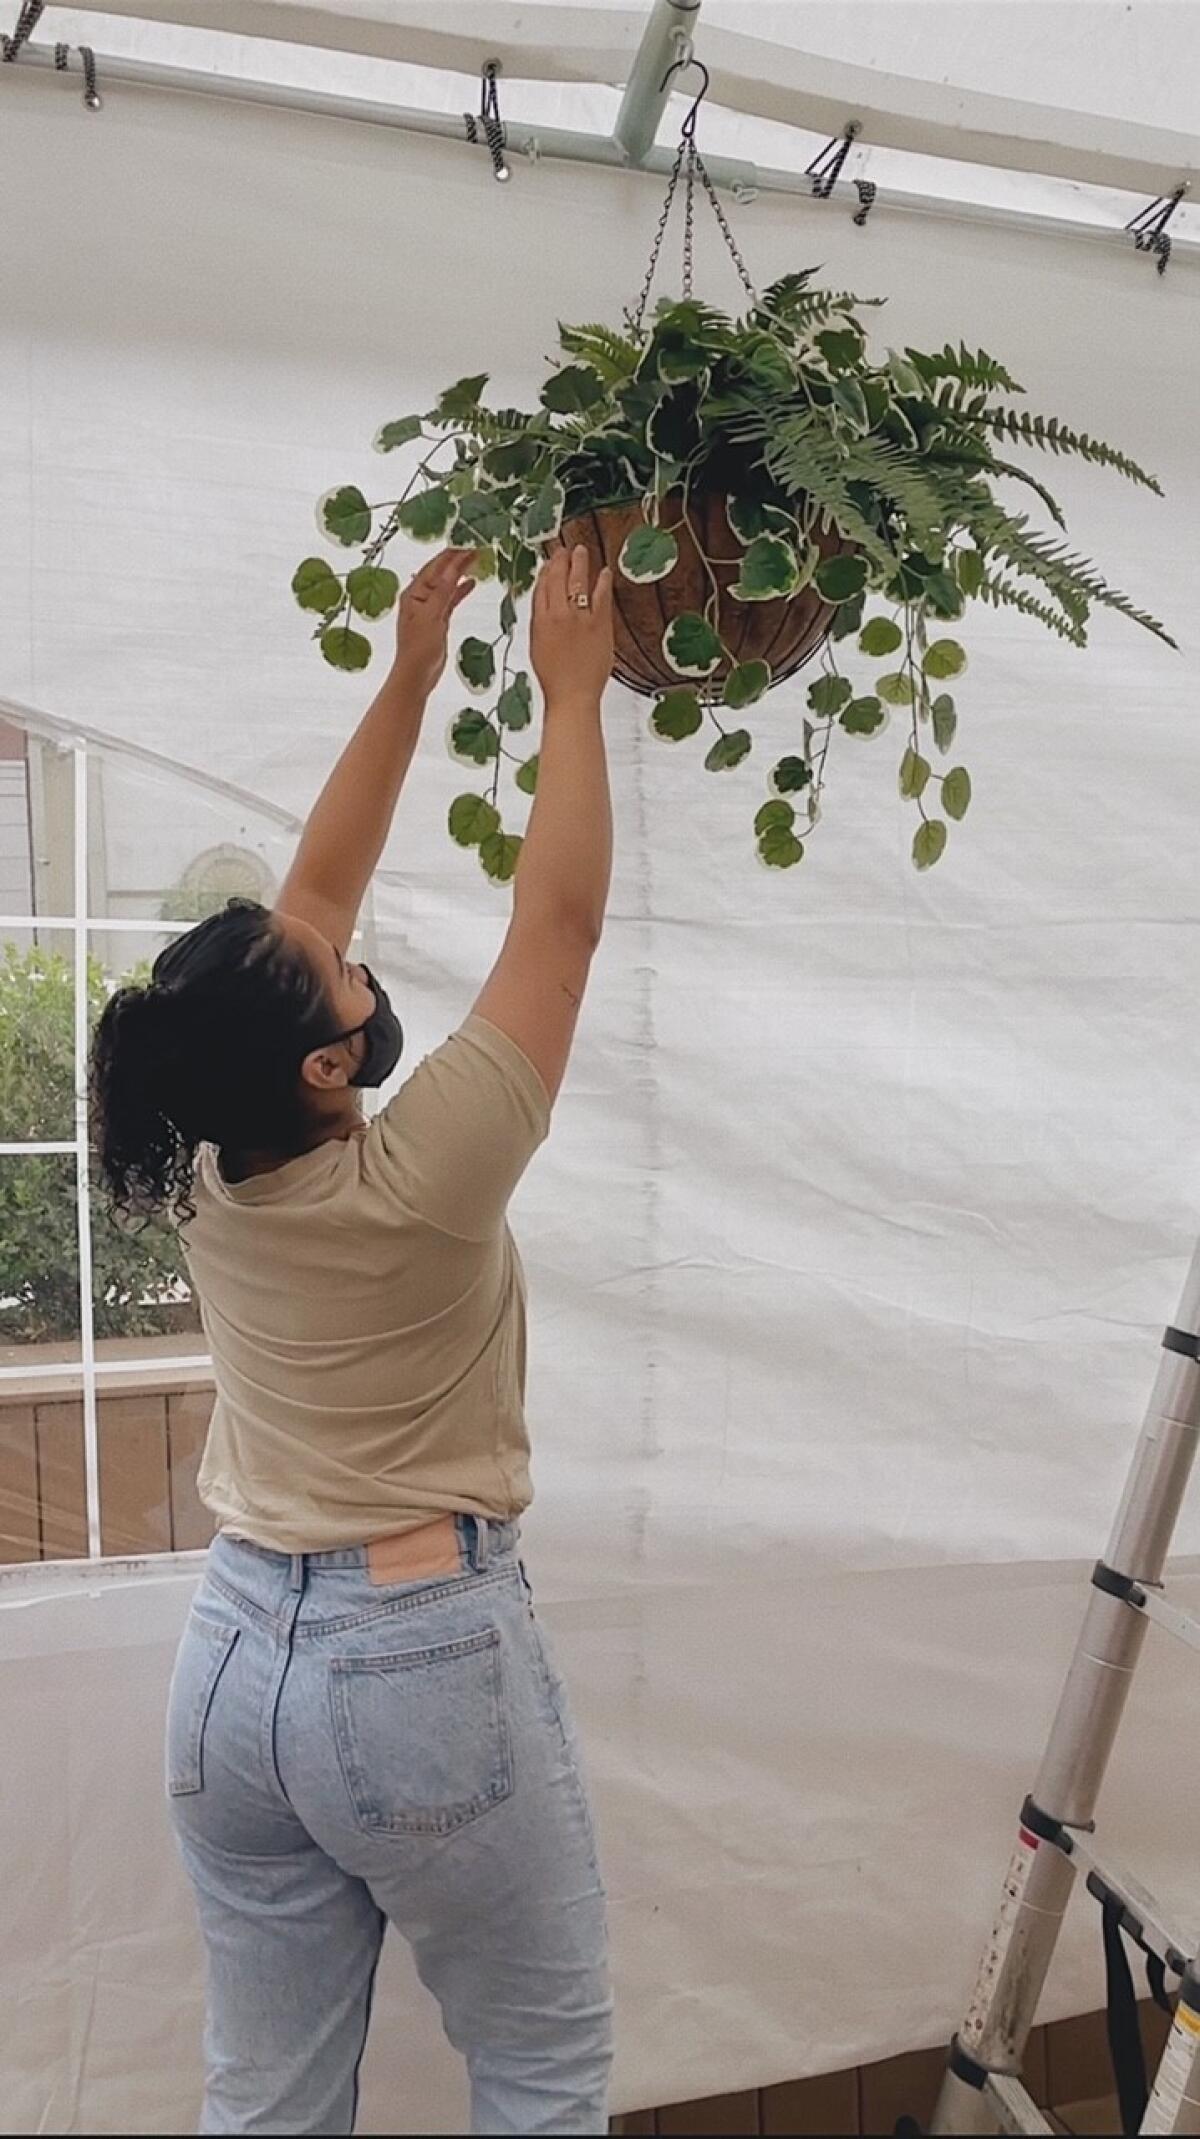 Lola Morales hangs a plant in a plant hanger from the ceiling.